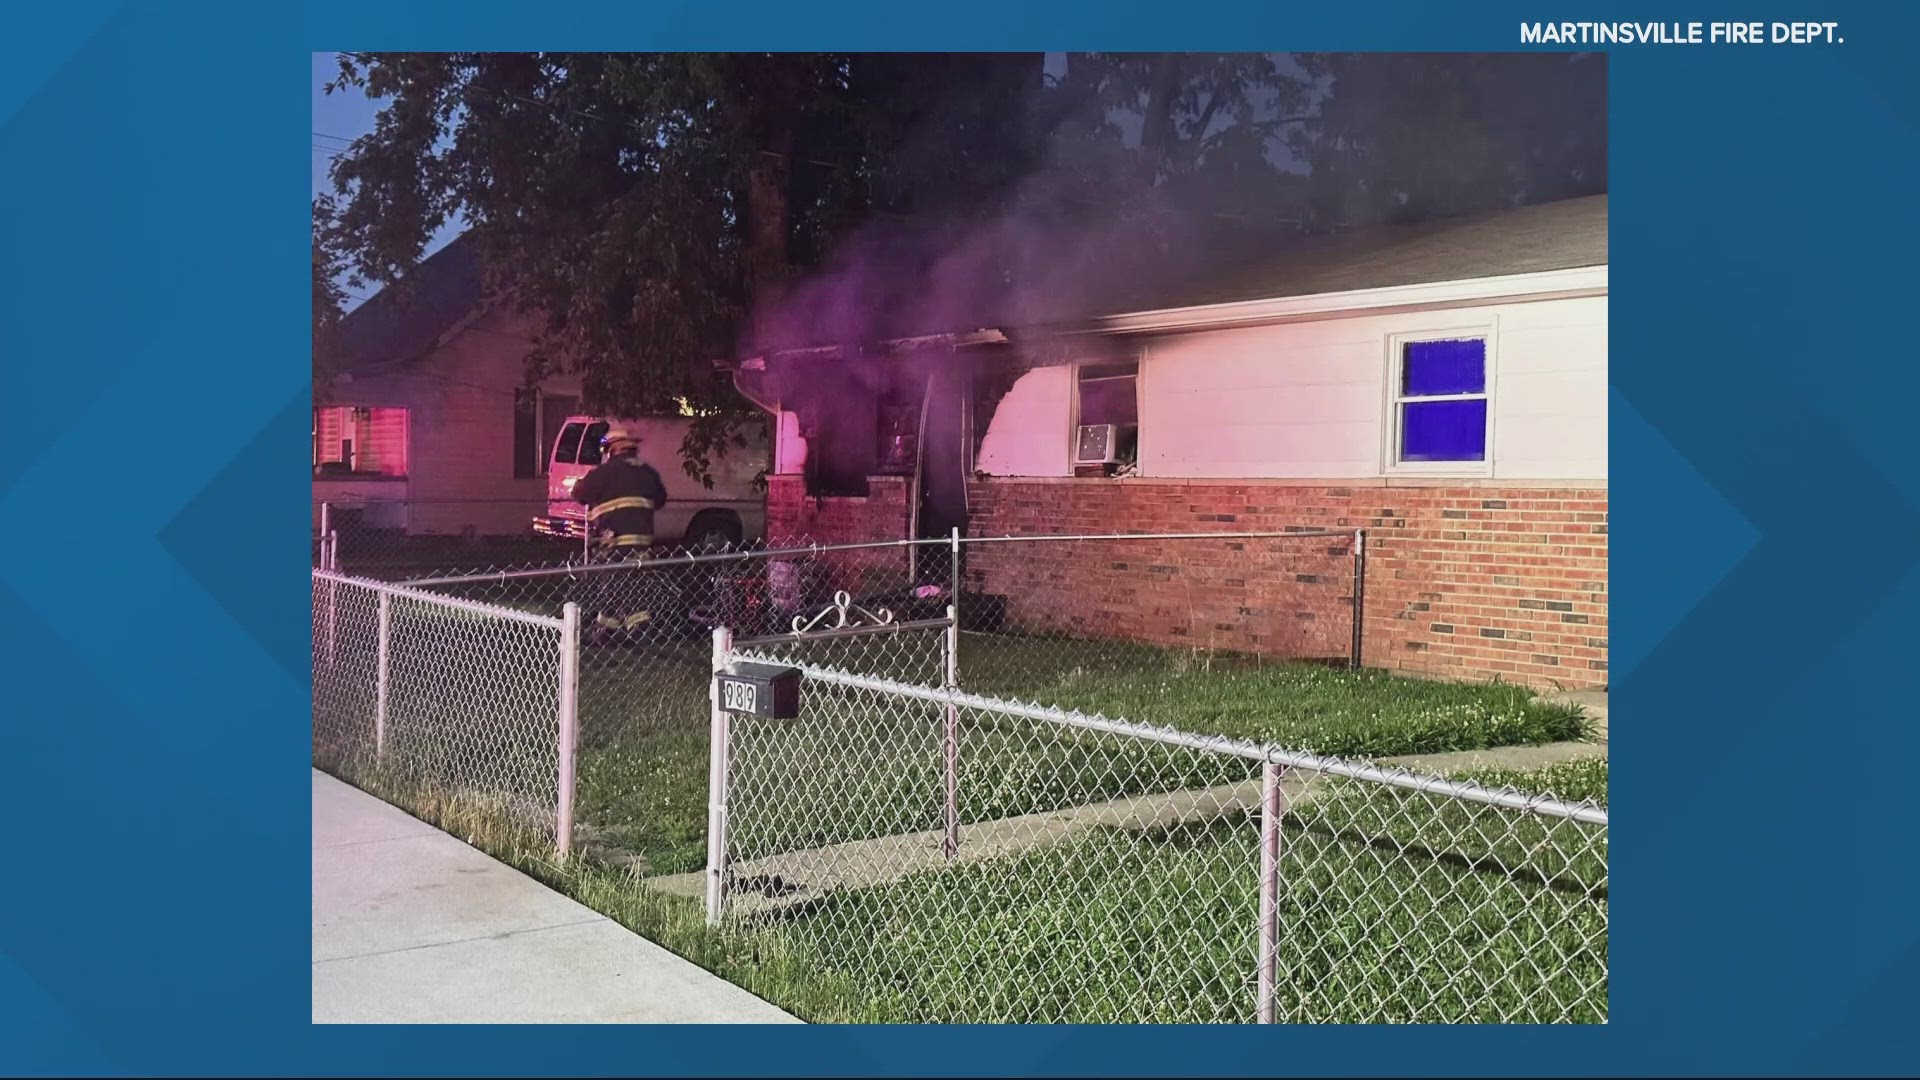 The Morgon County Coroner's Office said 69-year-old Robert Steven McCoy died in a fire Jul 7, on south Home Street.